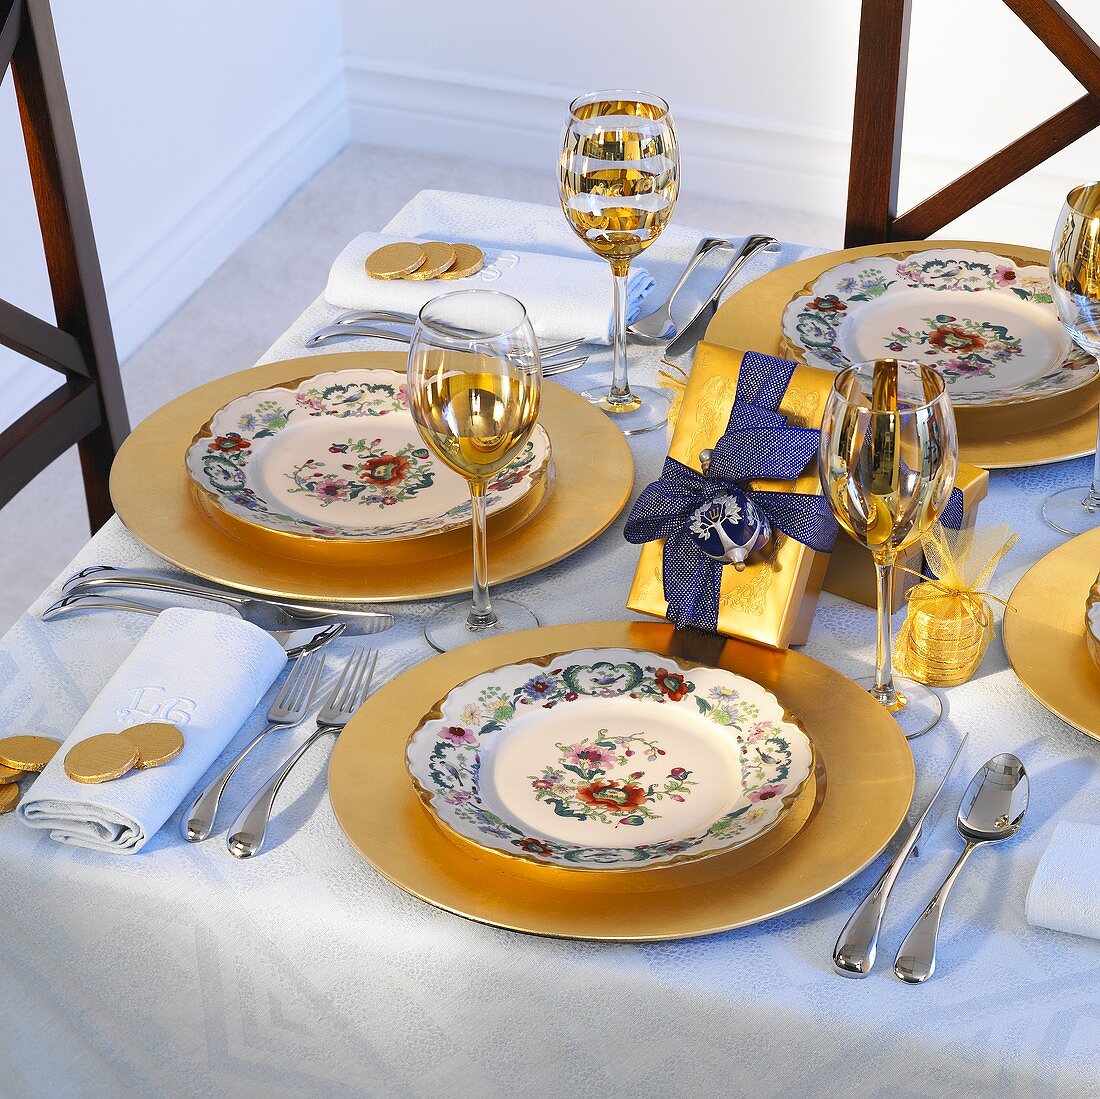 Christmas table laid in blue and gold